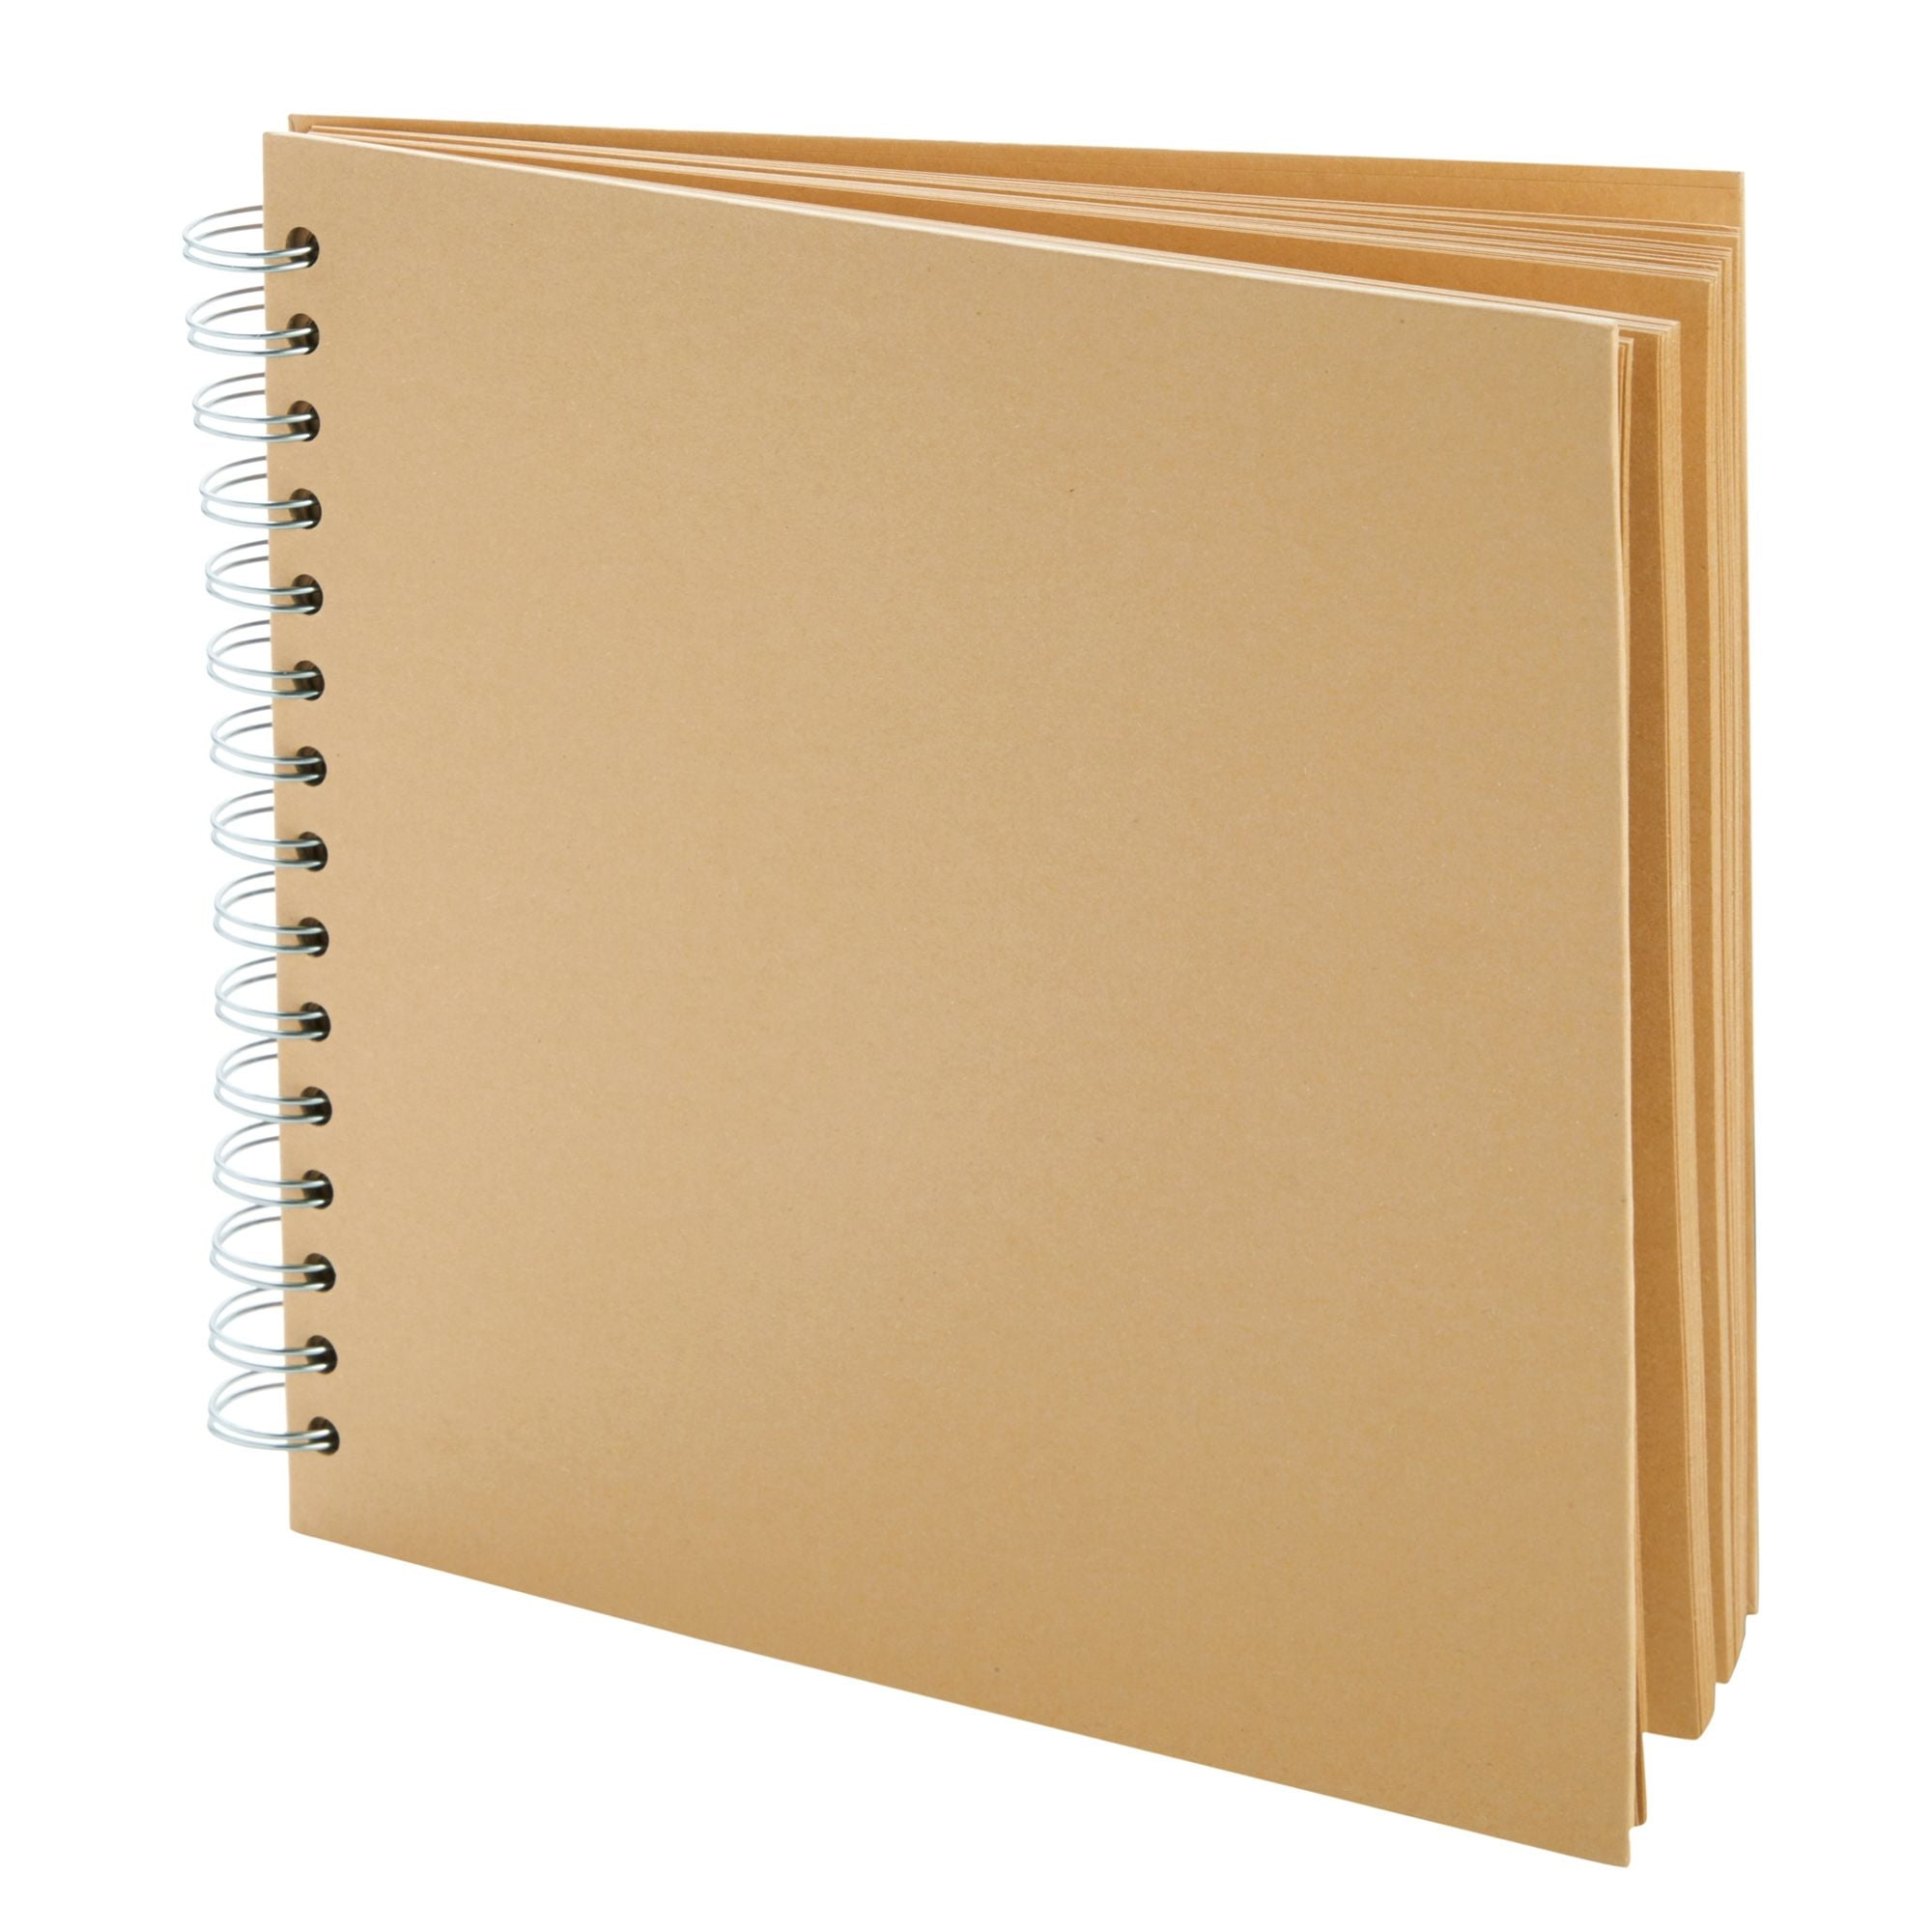 80 Pages Hardcover Kraft Scrapbook Albums, Blank Journal for Scrapbooking  (8x8 Inches) 